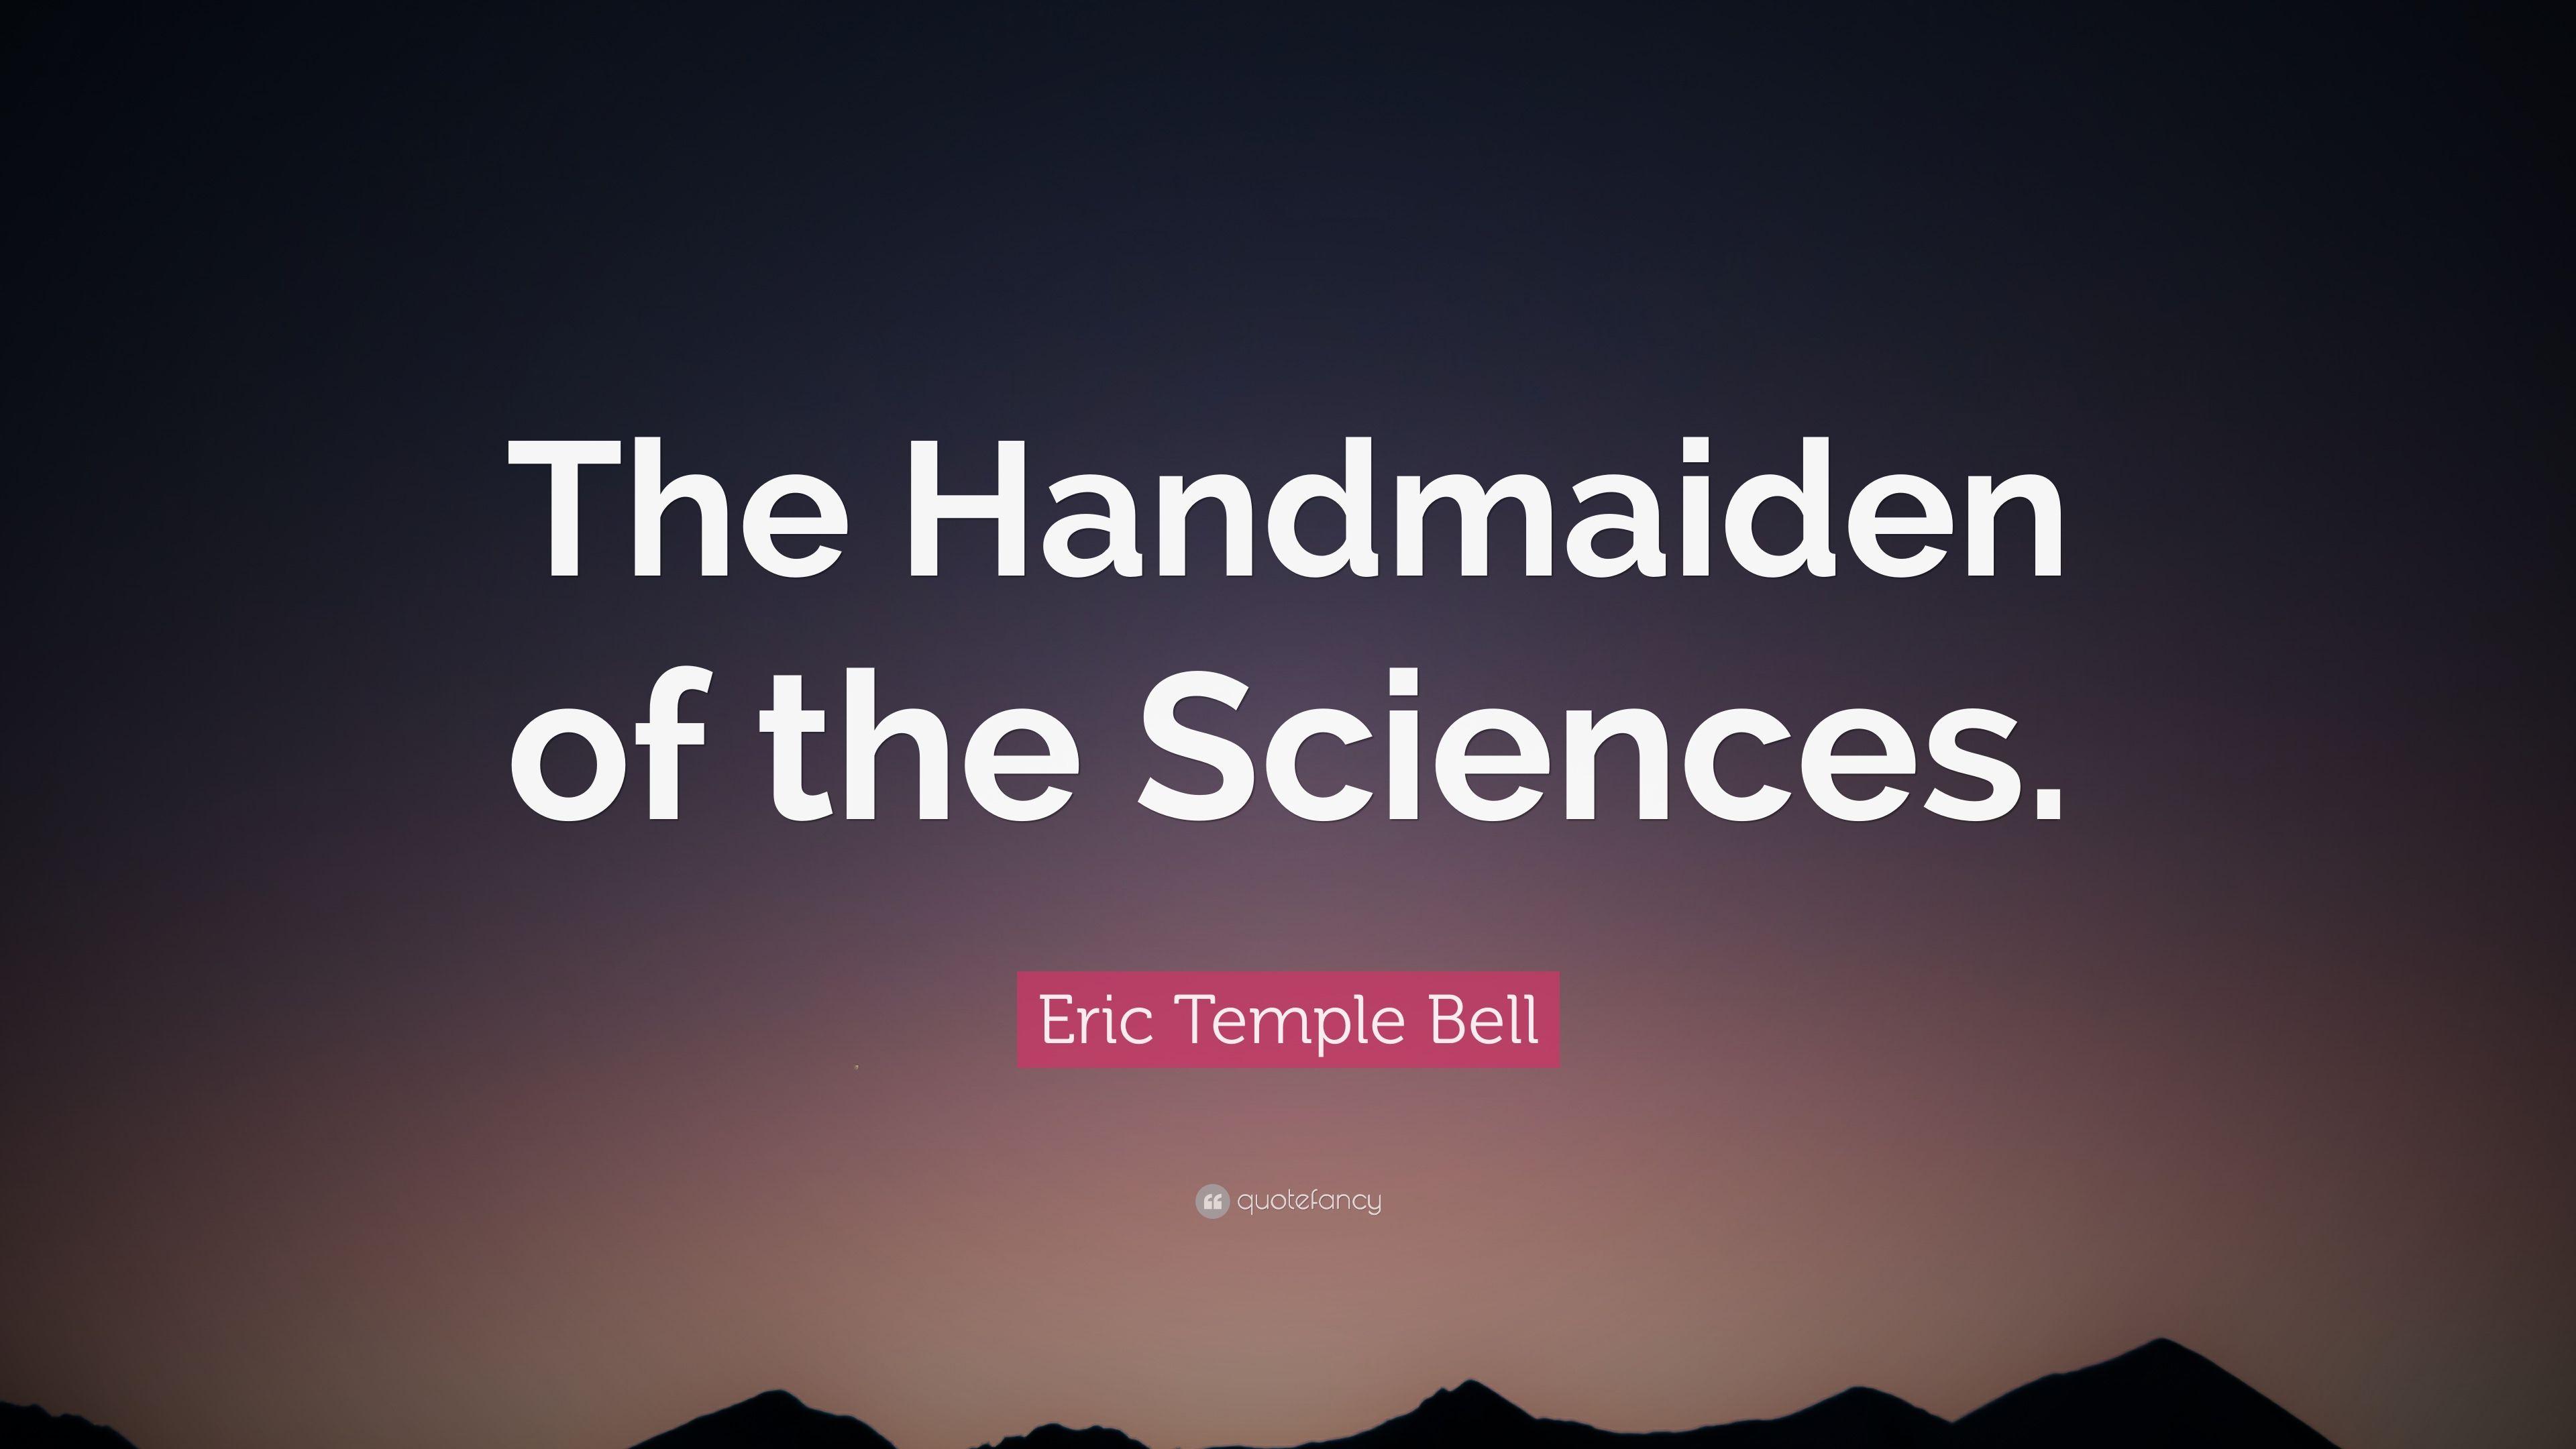 Eric Temple Bell Quote: “The Handmaiden of the Sciences.” 7